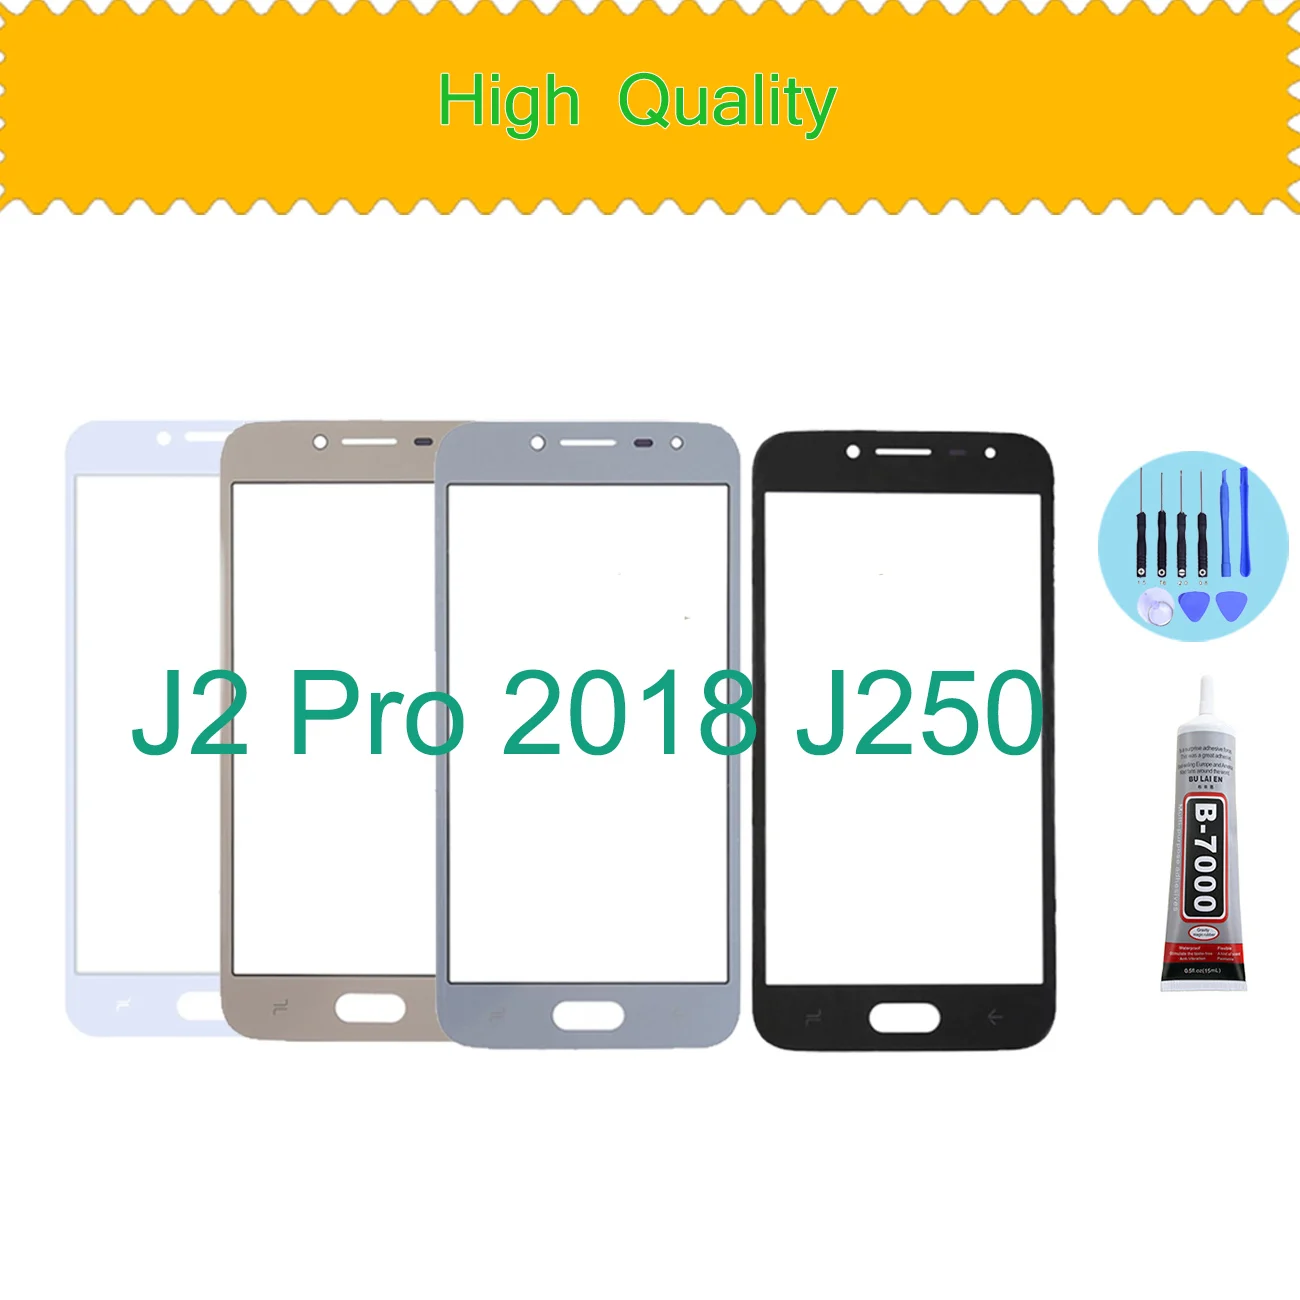 Replacement Lcd Front Touch Screen Glass Outer Lens For Samsung Galaxy J2 Pro 18 J250 J250f J250f Ds Mobile Phone Touch Panel Aliexpress